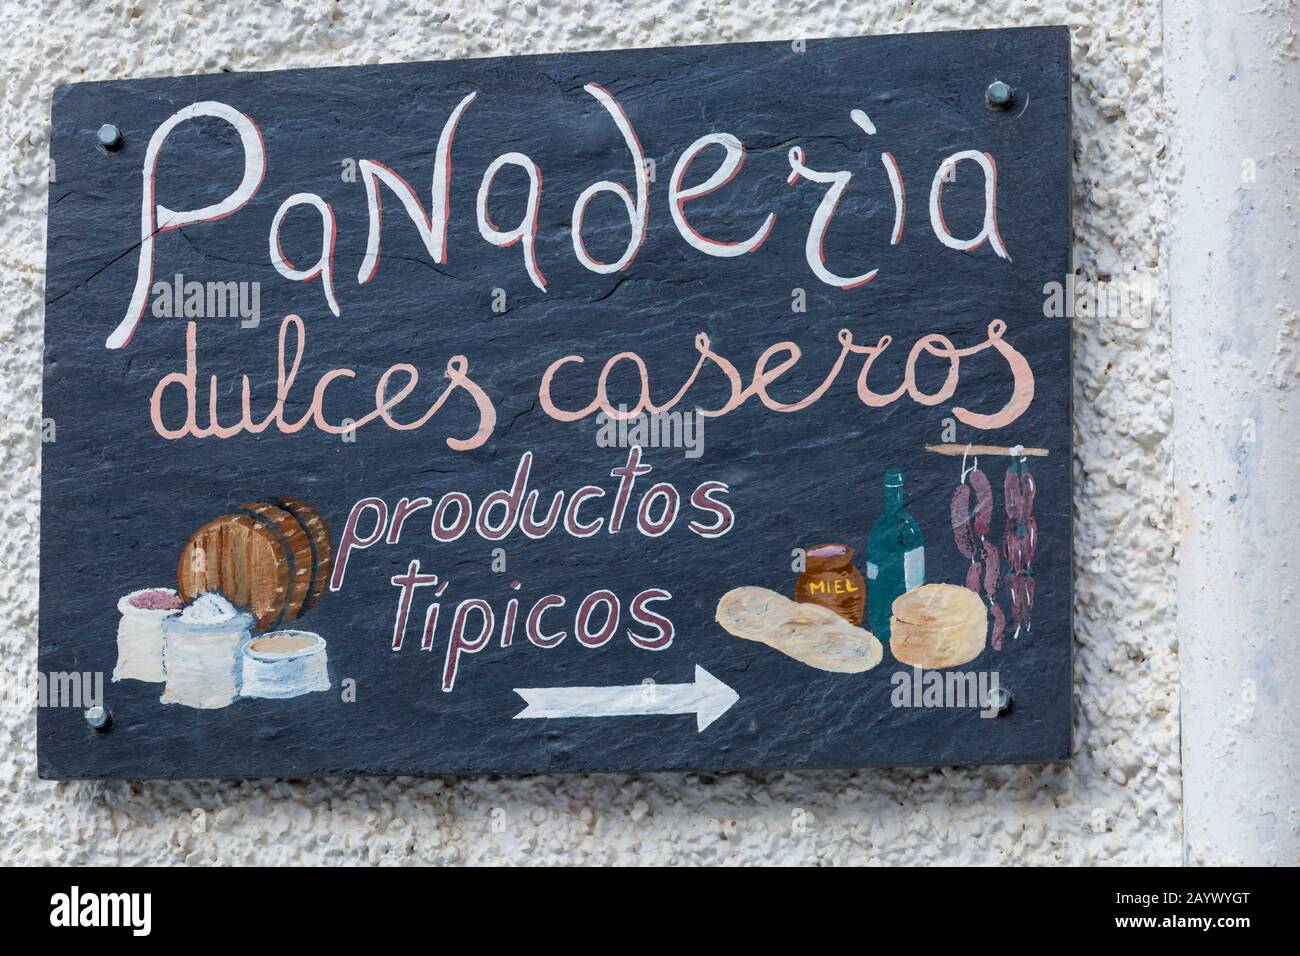 Panaderia dulces caseros sign at Pampaneira, Andalucia, Spain in February - homemade sweet bakery Stock Photo